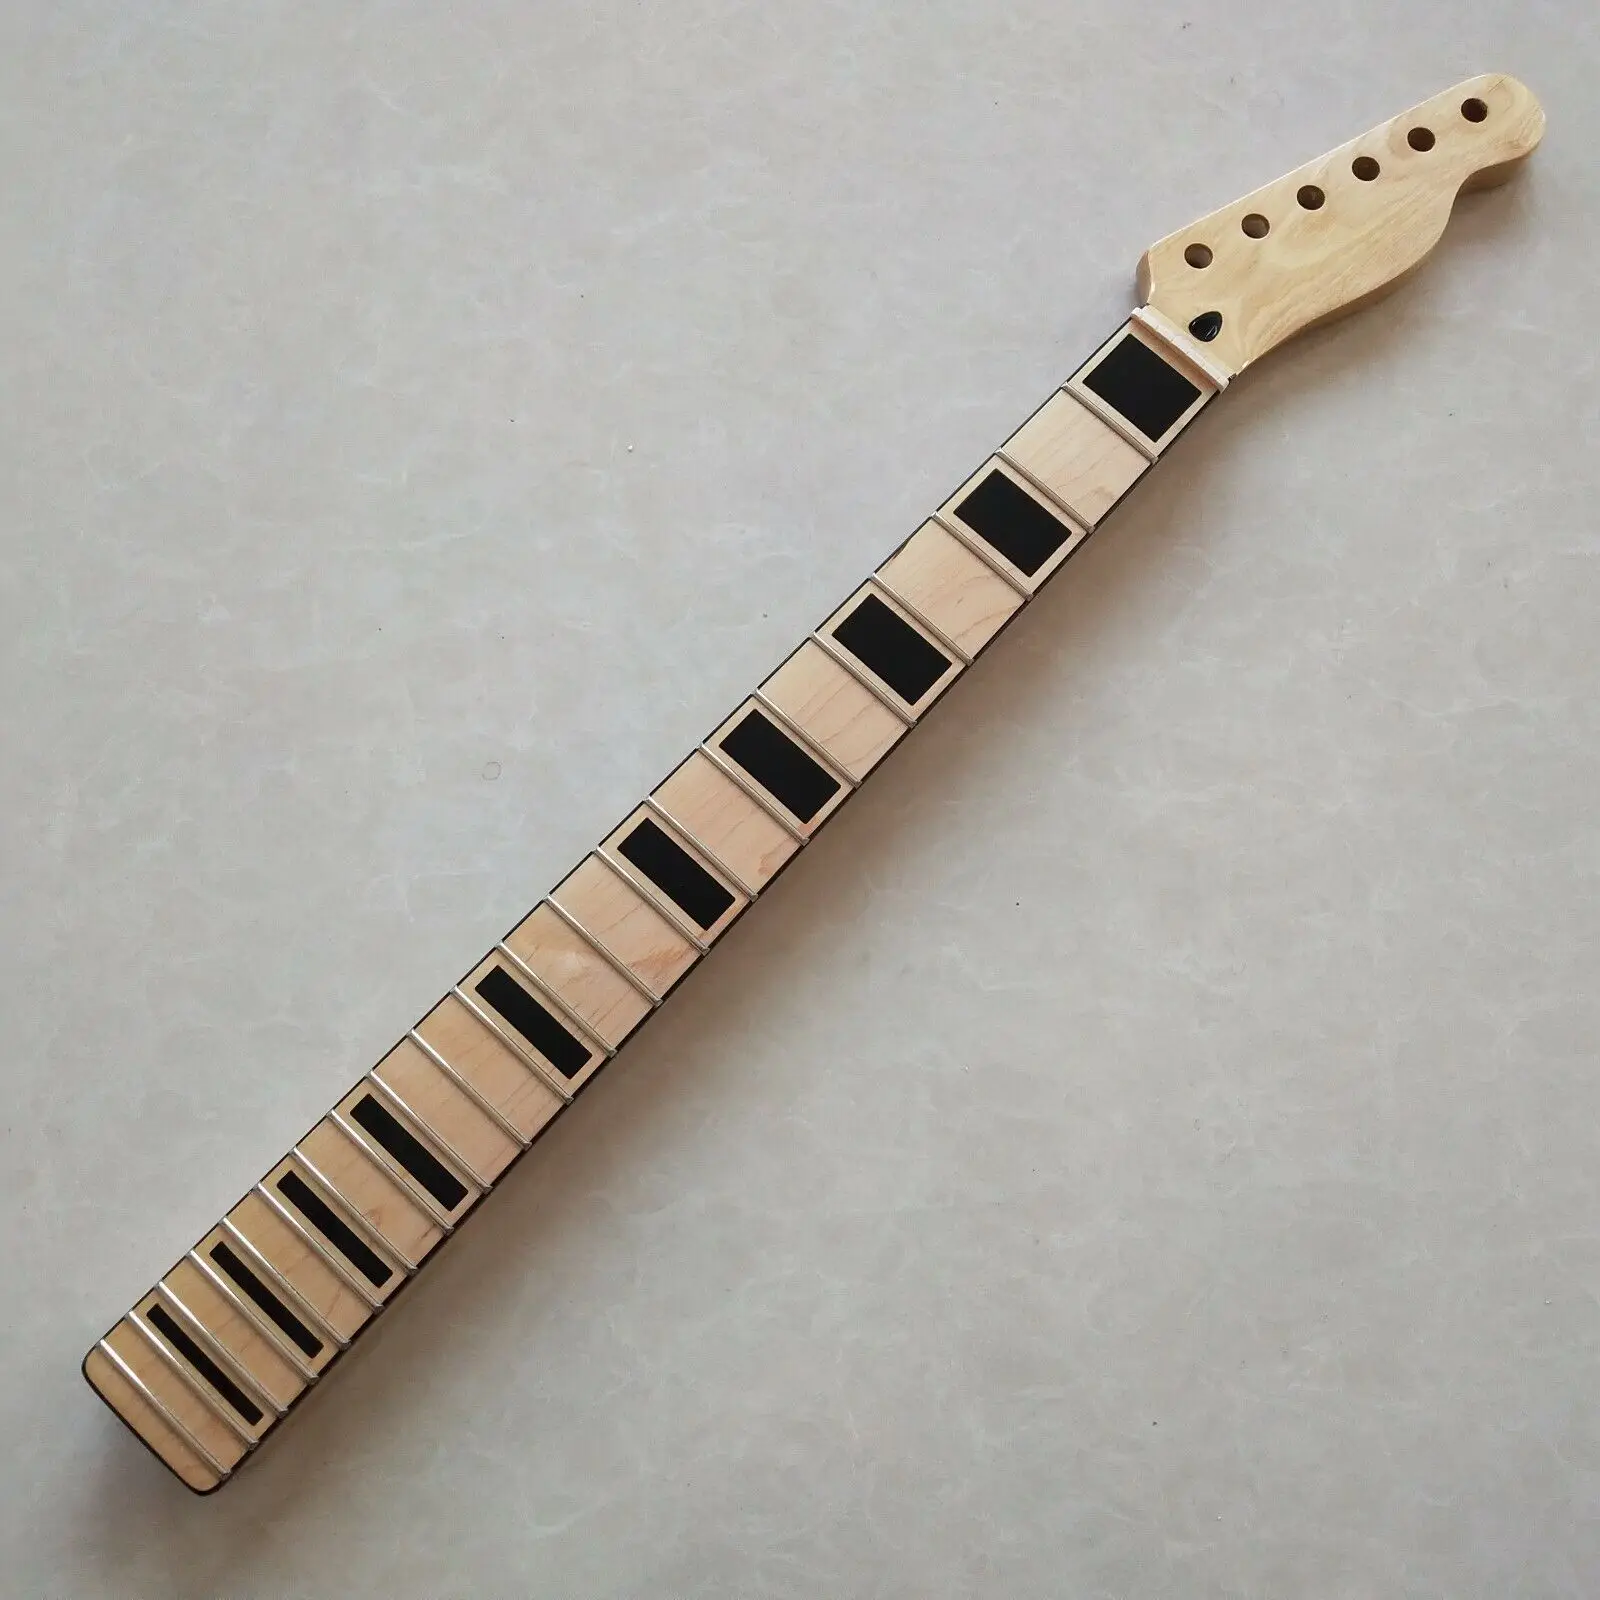 High quality Gloss Electric Guitar Neck 22 Fret 25.5inch Maple Fingerboard inlay enlarge